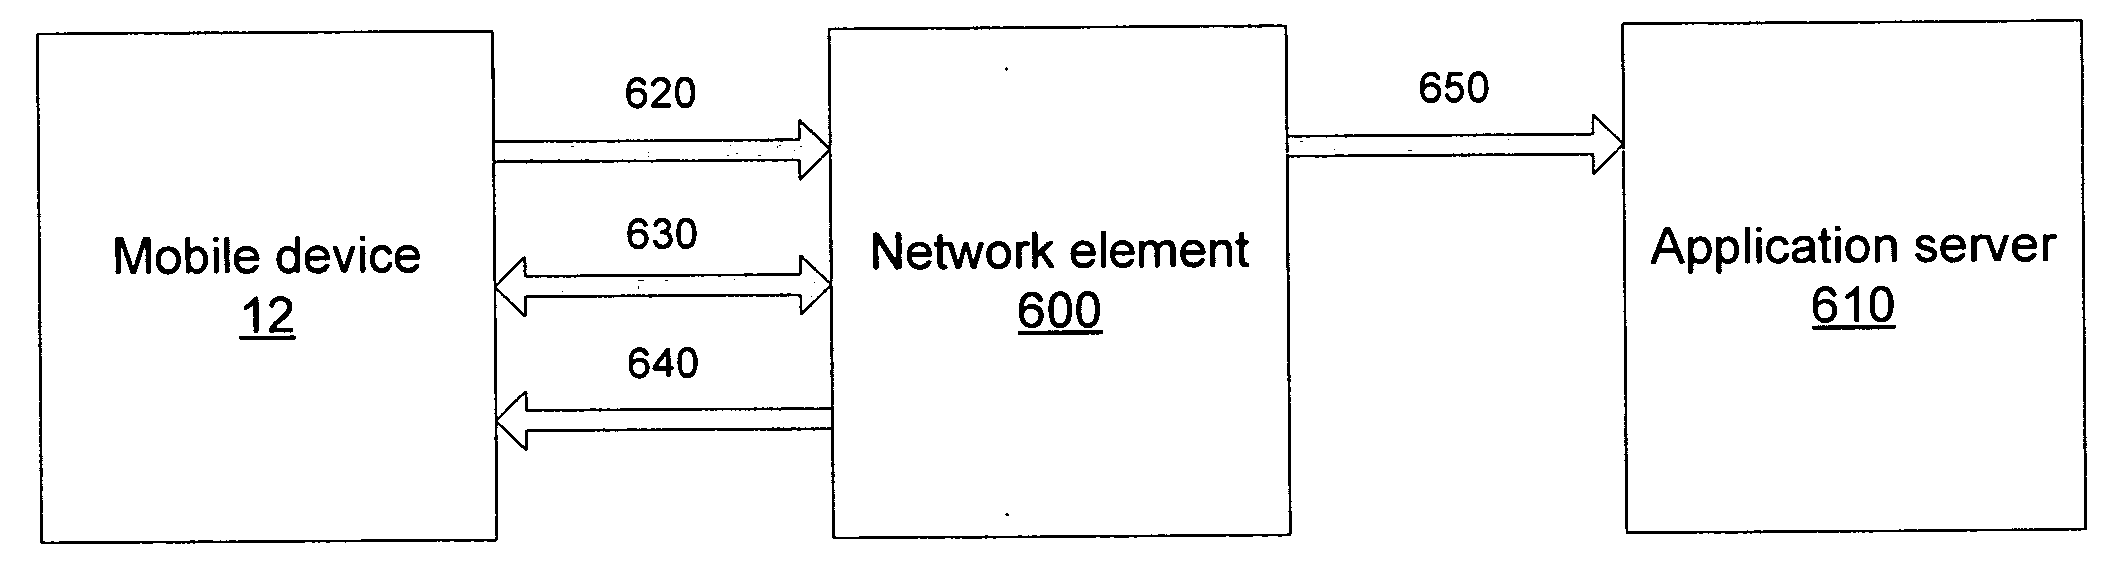 Mobile network optimized method for keeping an application IP connection always on